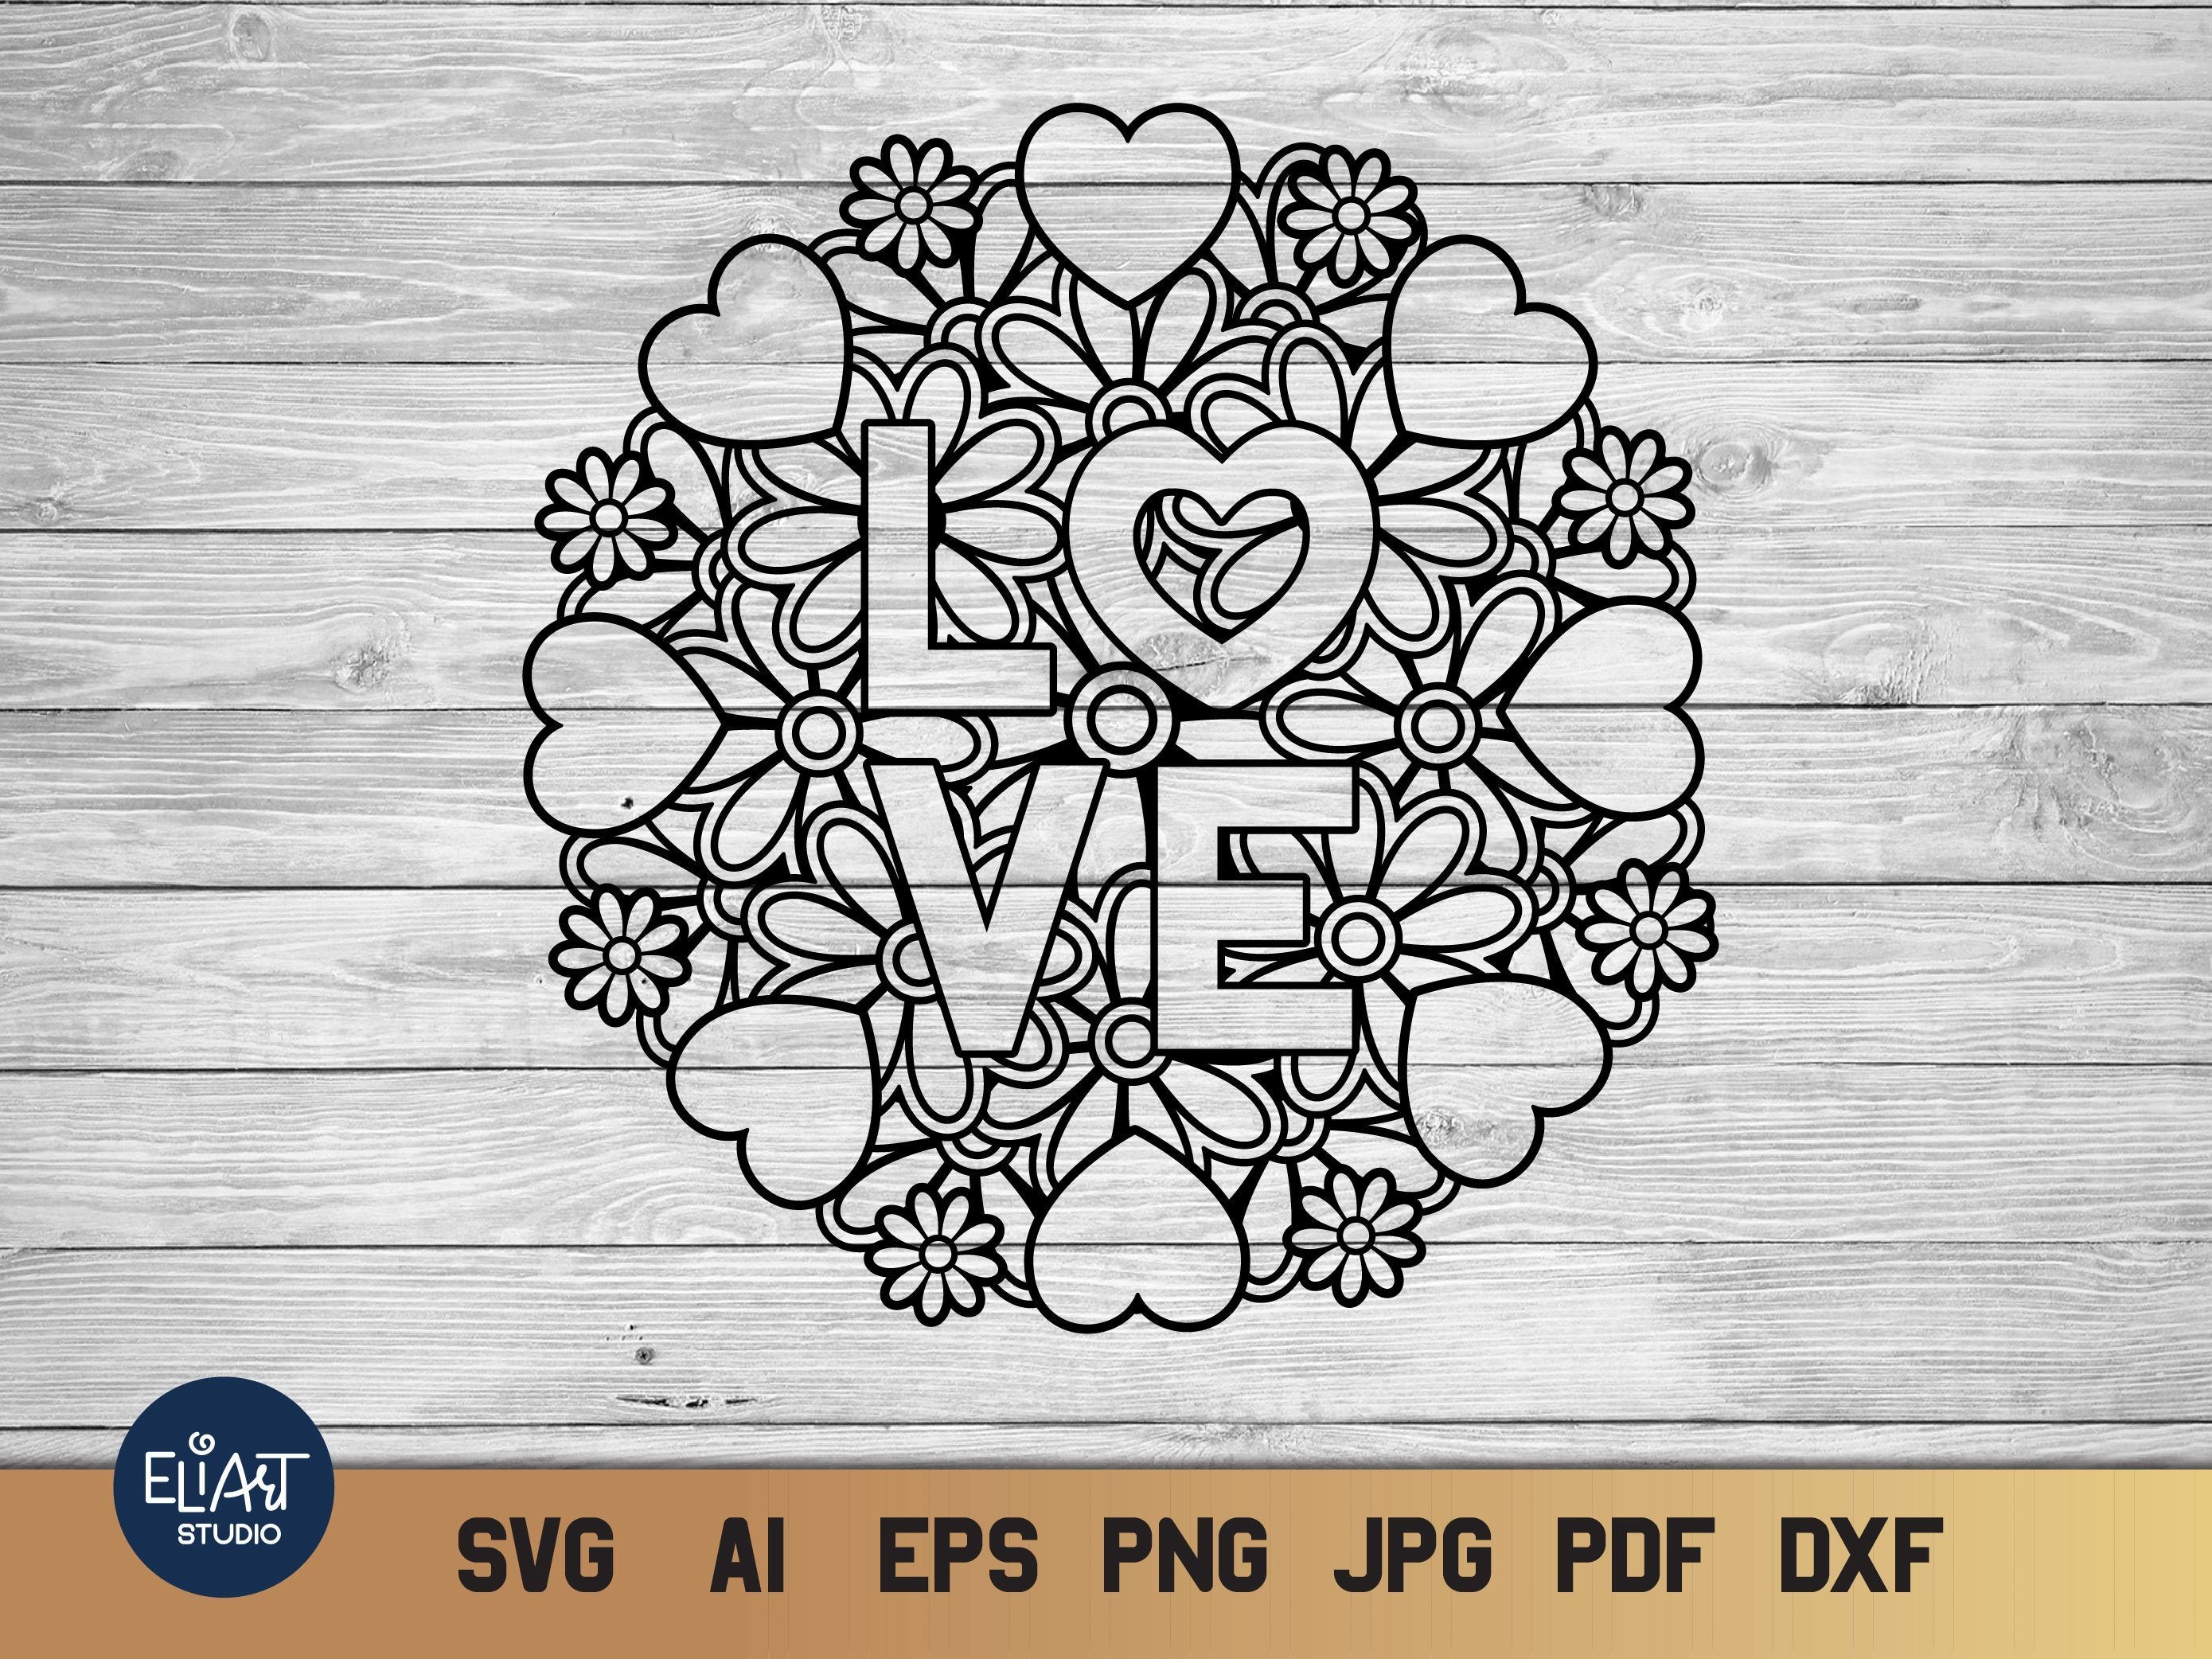 Clip Art 3d Layered Love And Butterfly Mandala Svg Valentine S Day Dxf Files For Cricut Silhouette Art Collectibles